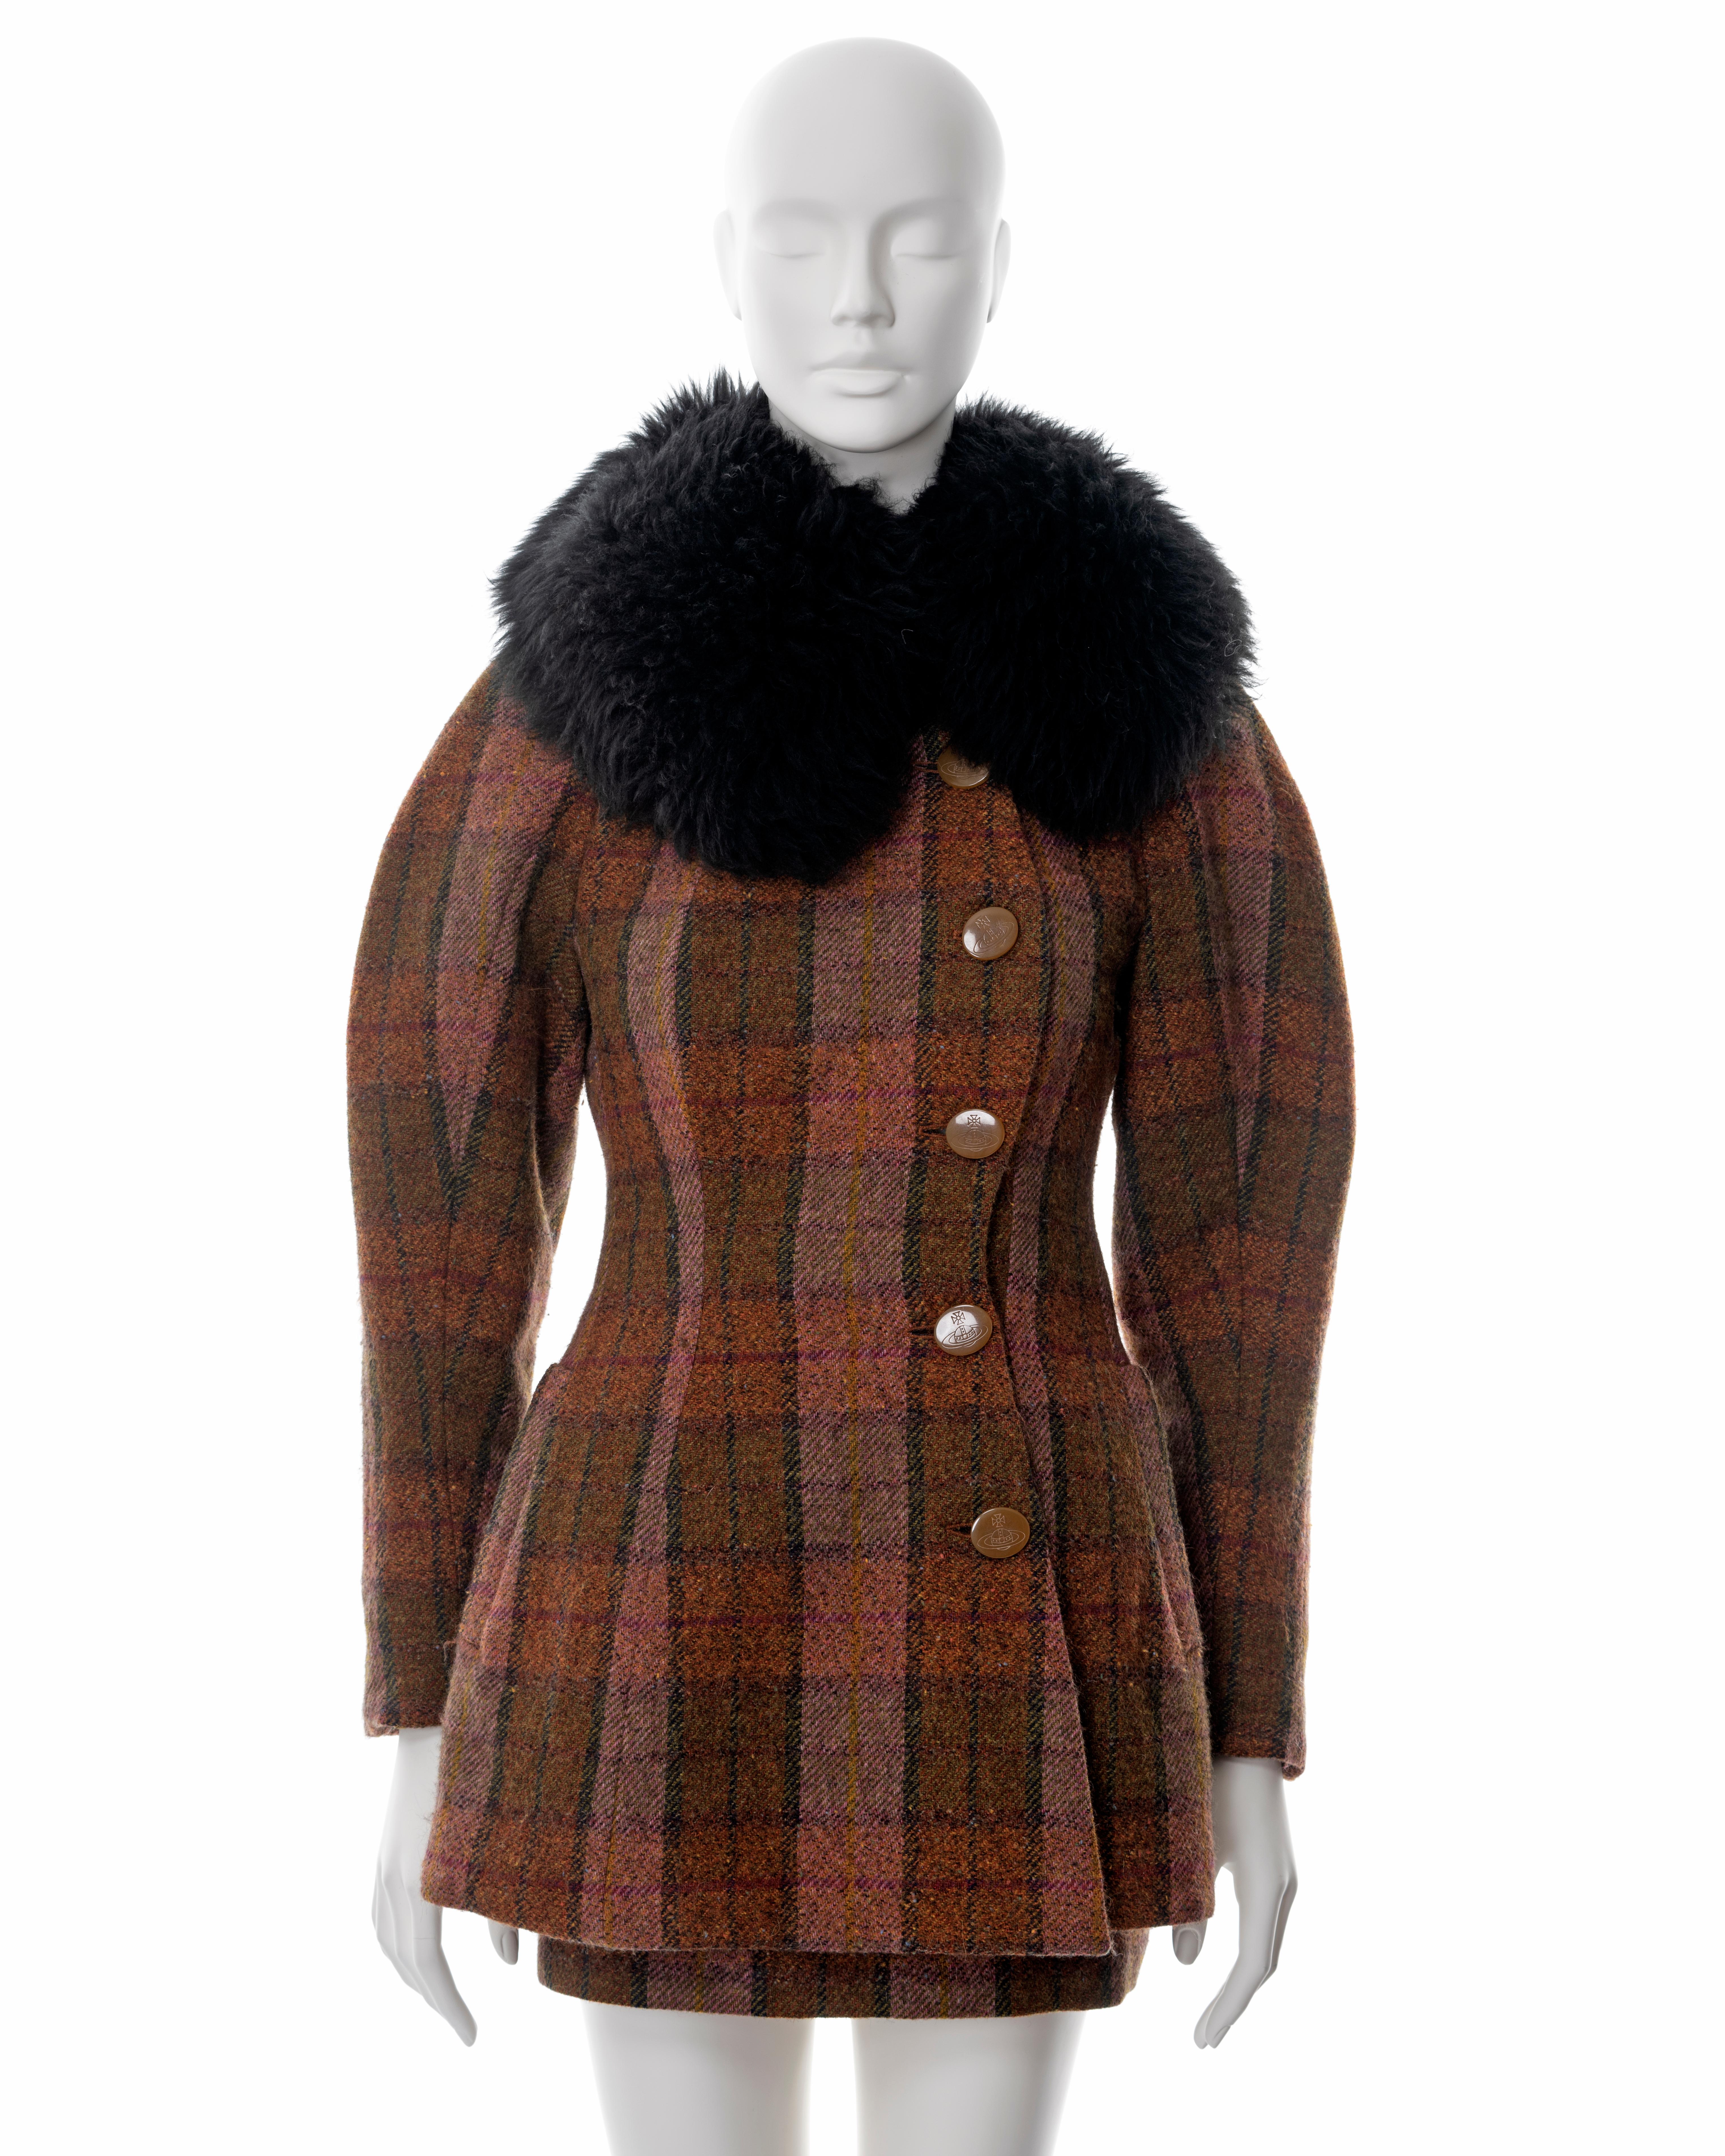 ▪ Vivienne Westwood brown tartan tweed skirt suit
▪ Sold by One of a Kind Archive
▪ Fall-Winter 1995
▪ Hourglass cut jacket with detachable sheepskin collar 
▪ Large orb-etched buttons 
▪ Leg-of-mutton sleeves
▪ Wool and Alpaca blend 
▪ Jacket rear